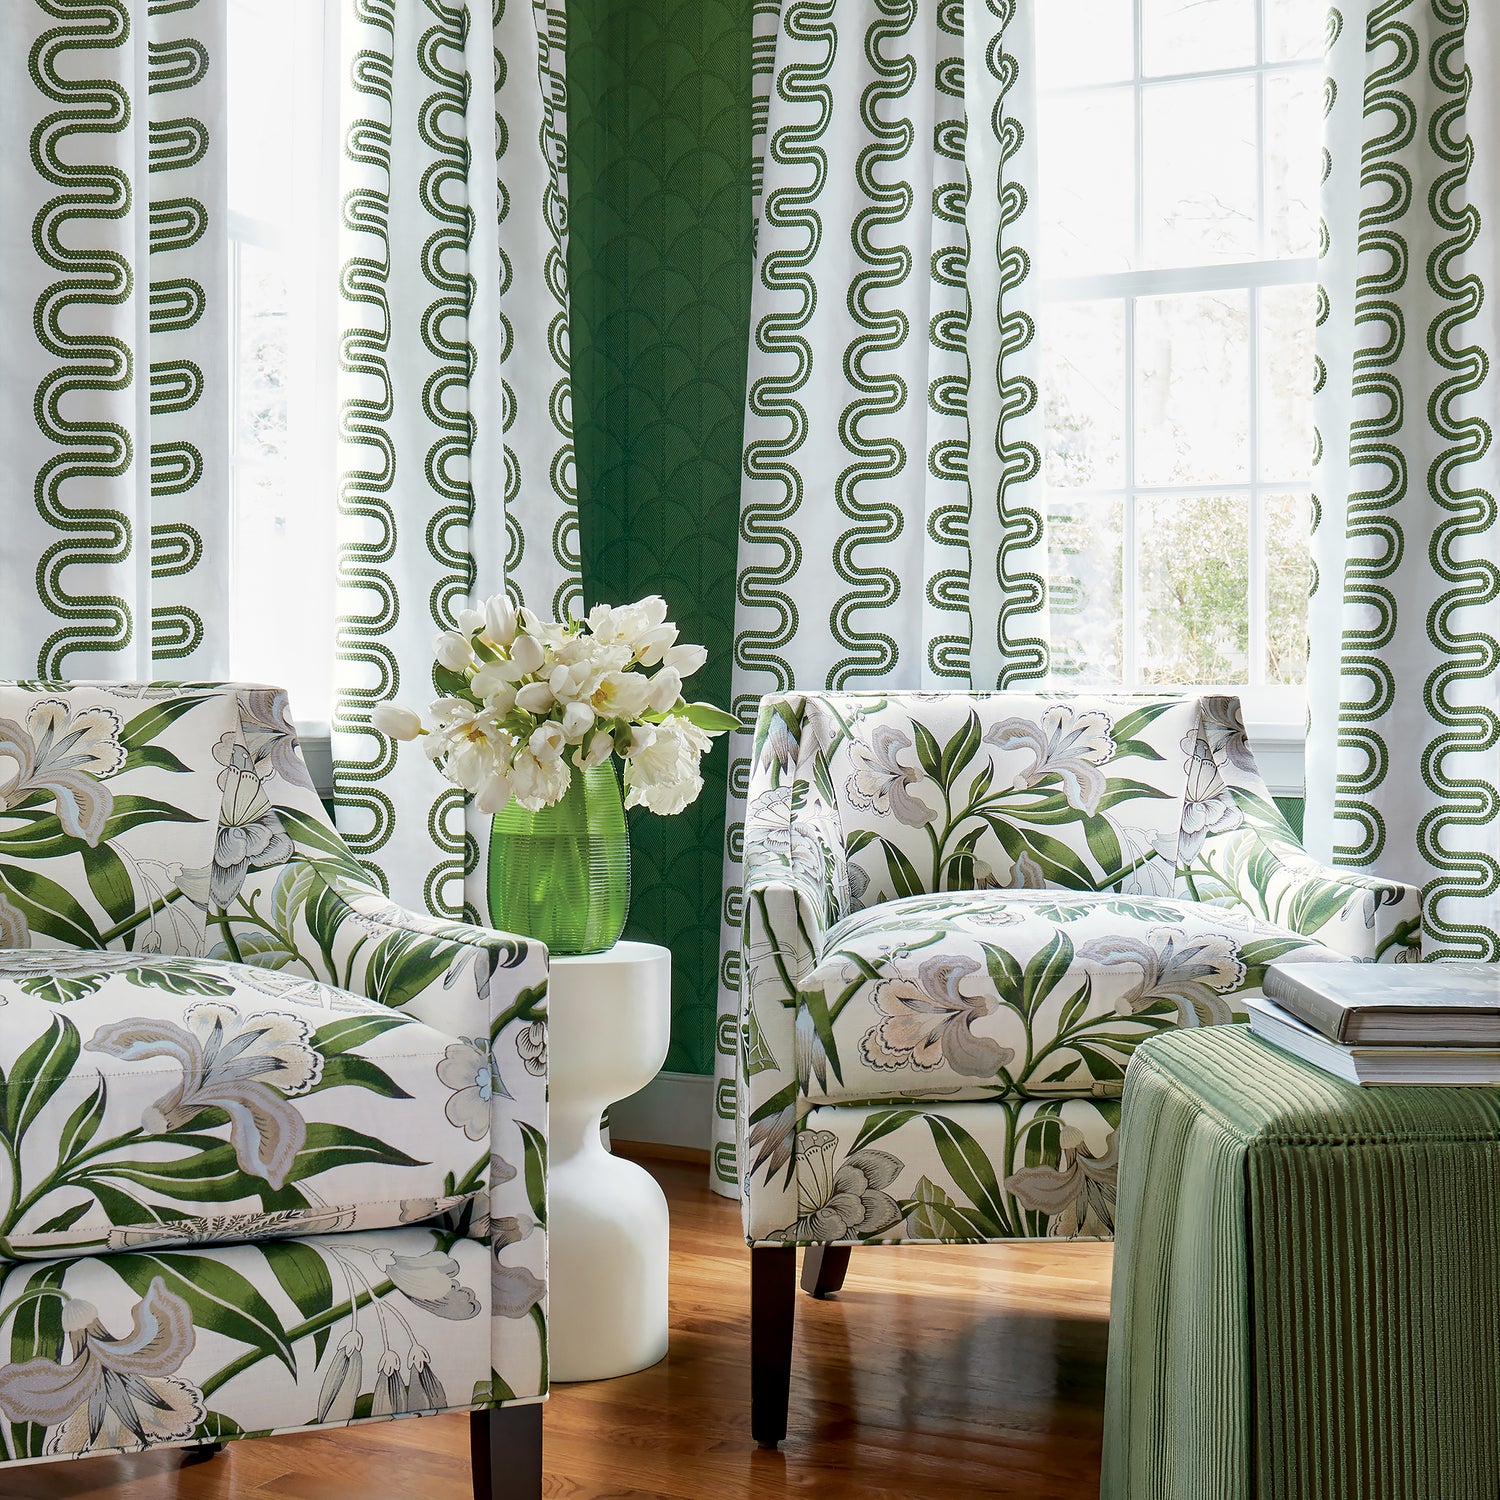 Two Everett Chairs in Cleo printed fabric in Green and White - pattern number AF9622 - by Anna French